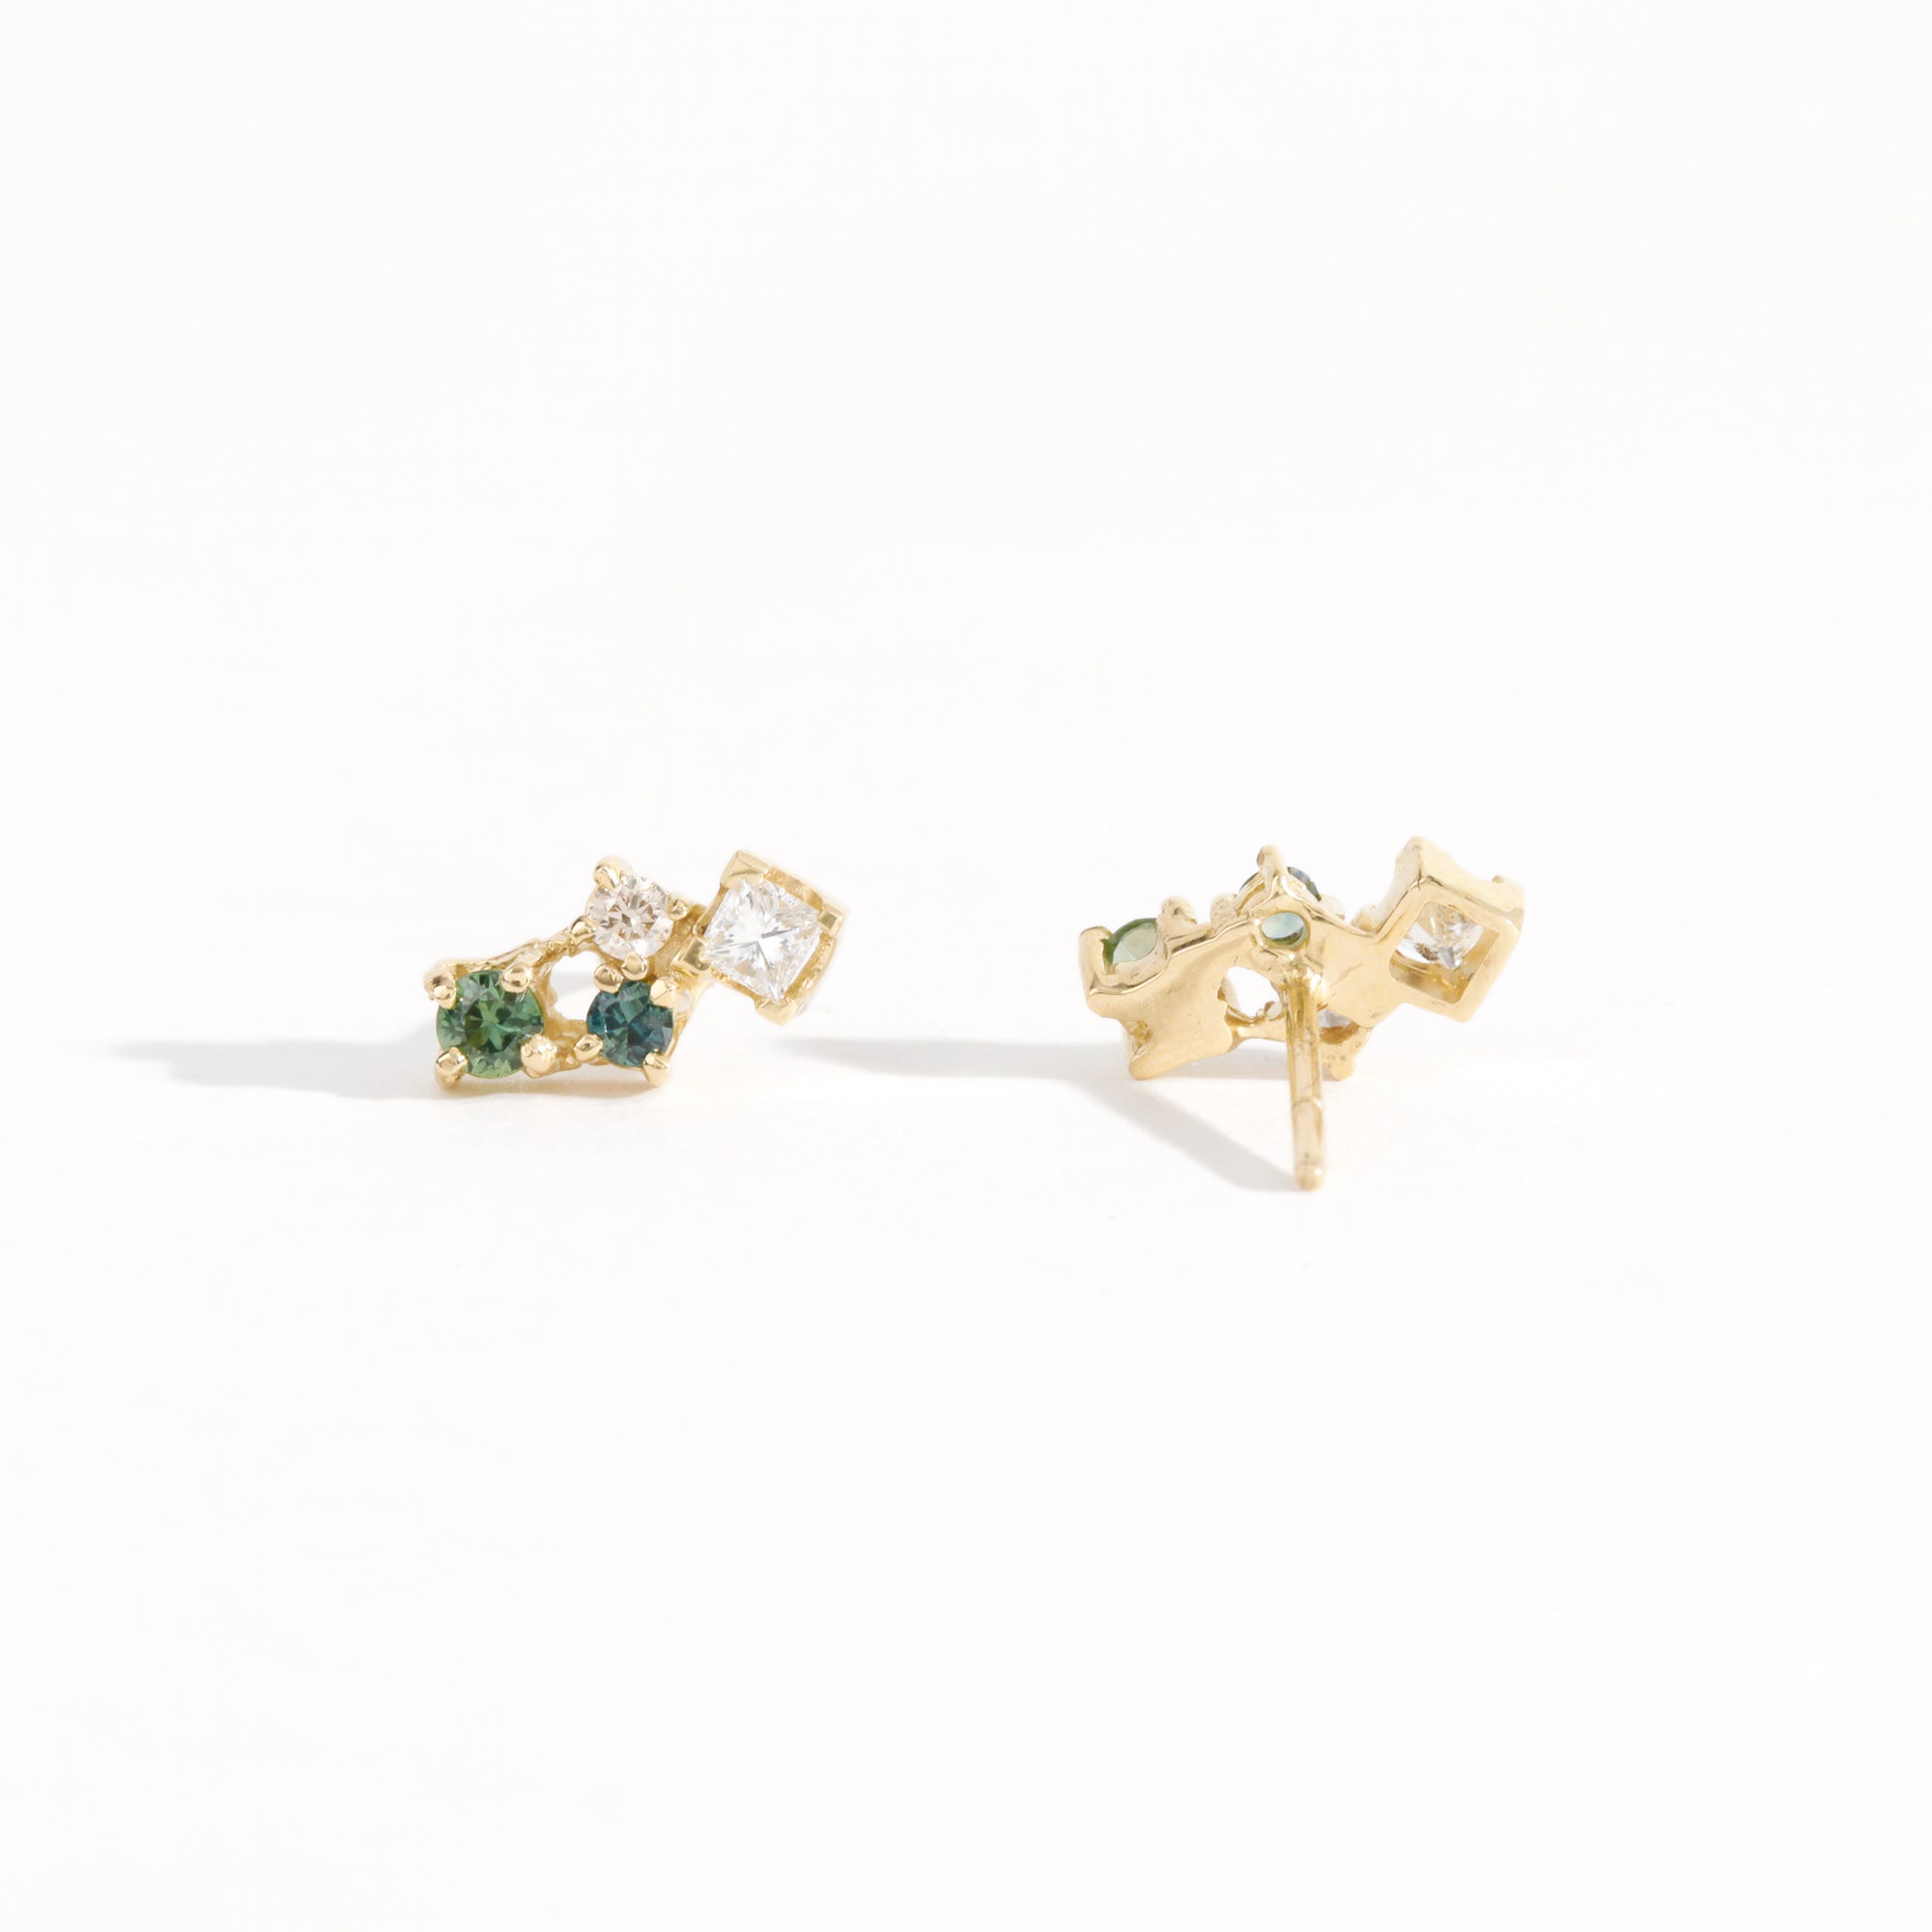 A pair of cluster earring studs with ethically sourced Australian sapphires and diamonds with mixed shapes. Hand crafted in 9ct yellow gold by Black Finch Jewellery